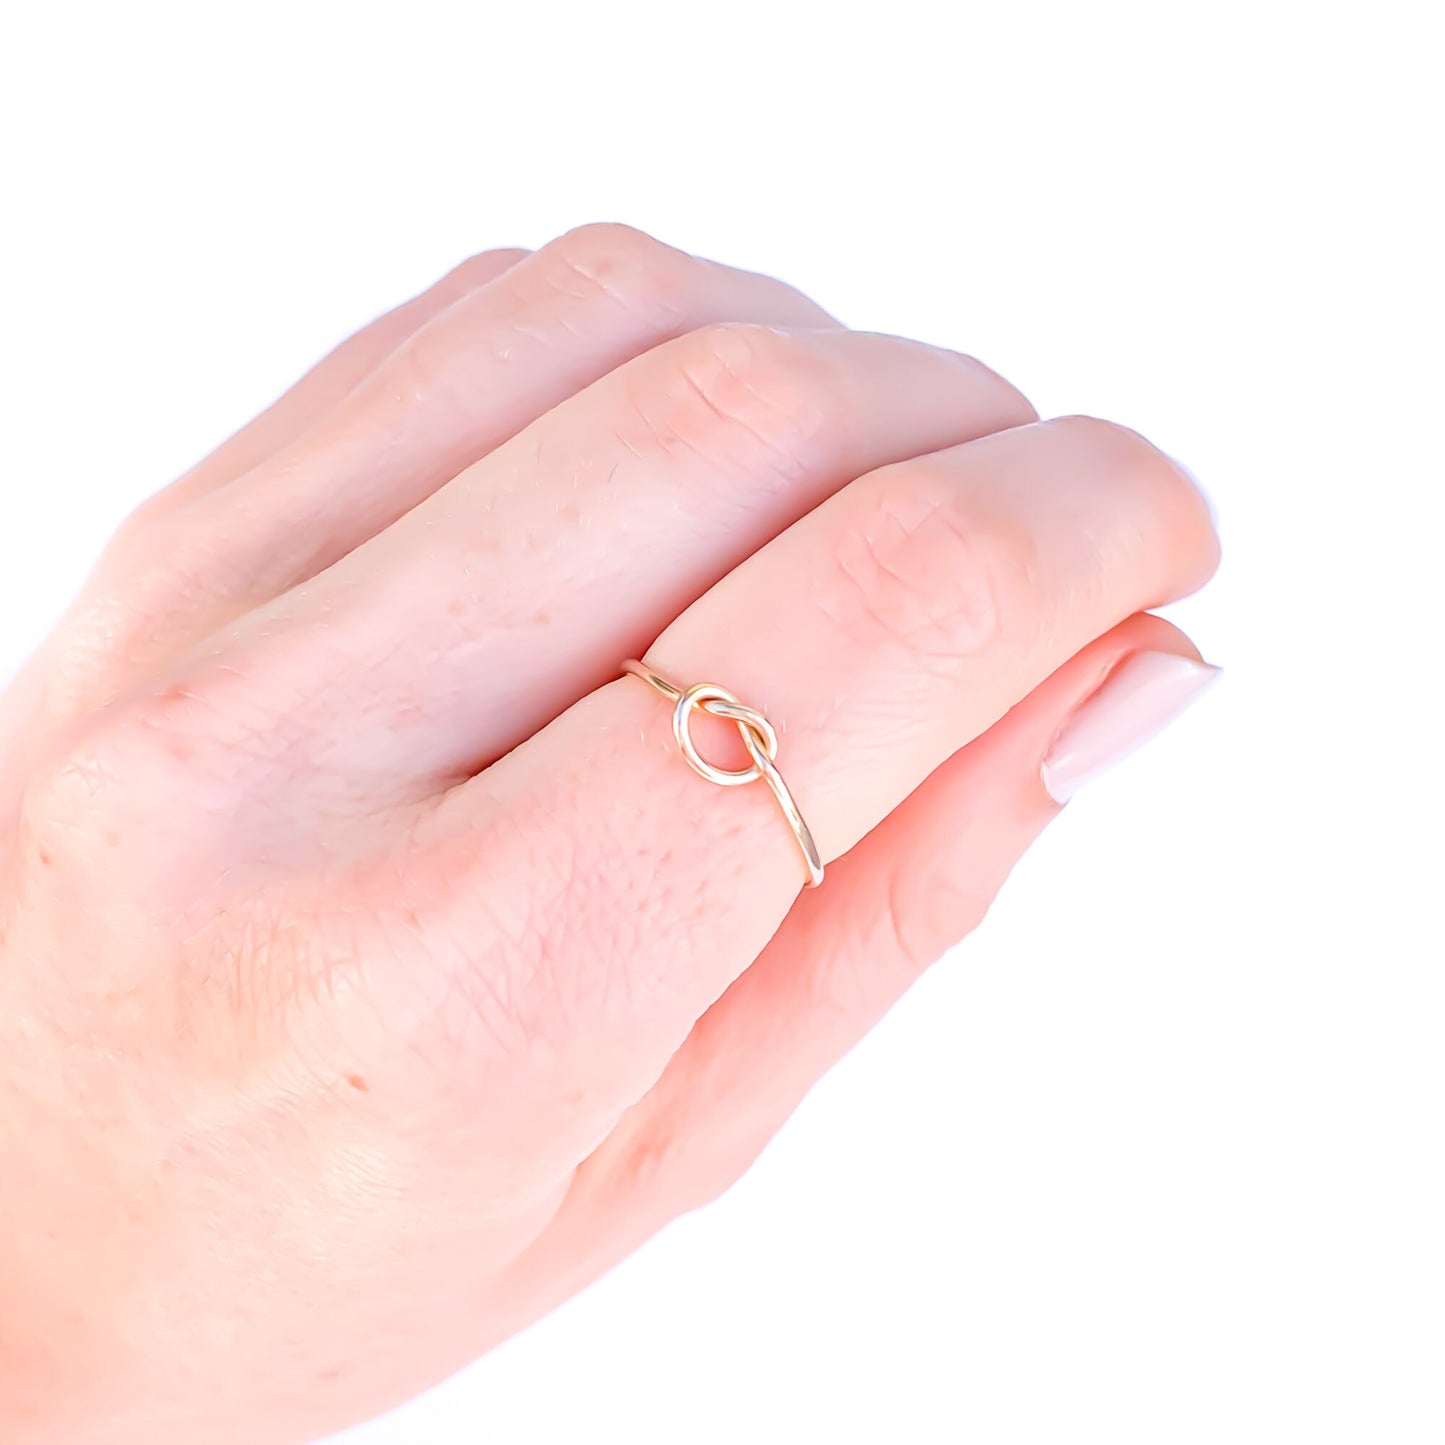 Gold Knot Ring, 14K Gold Filled